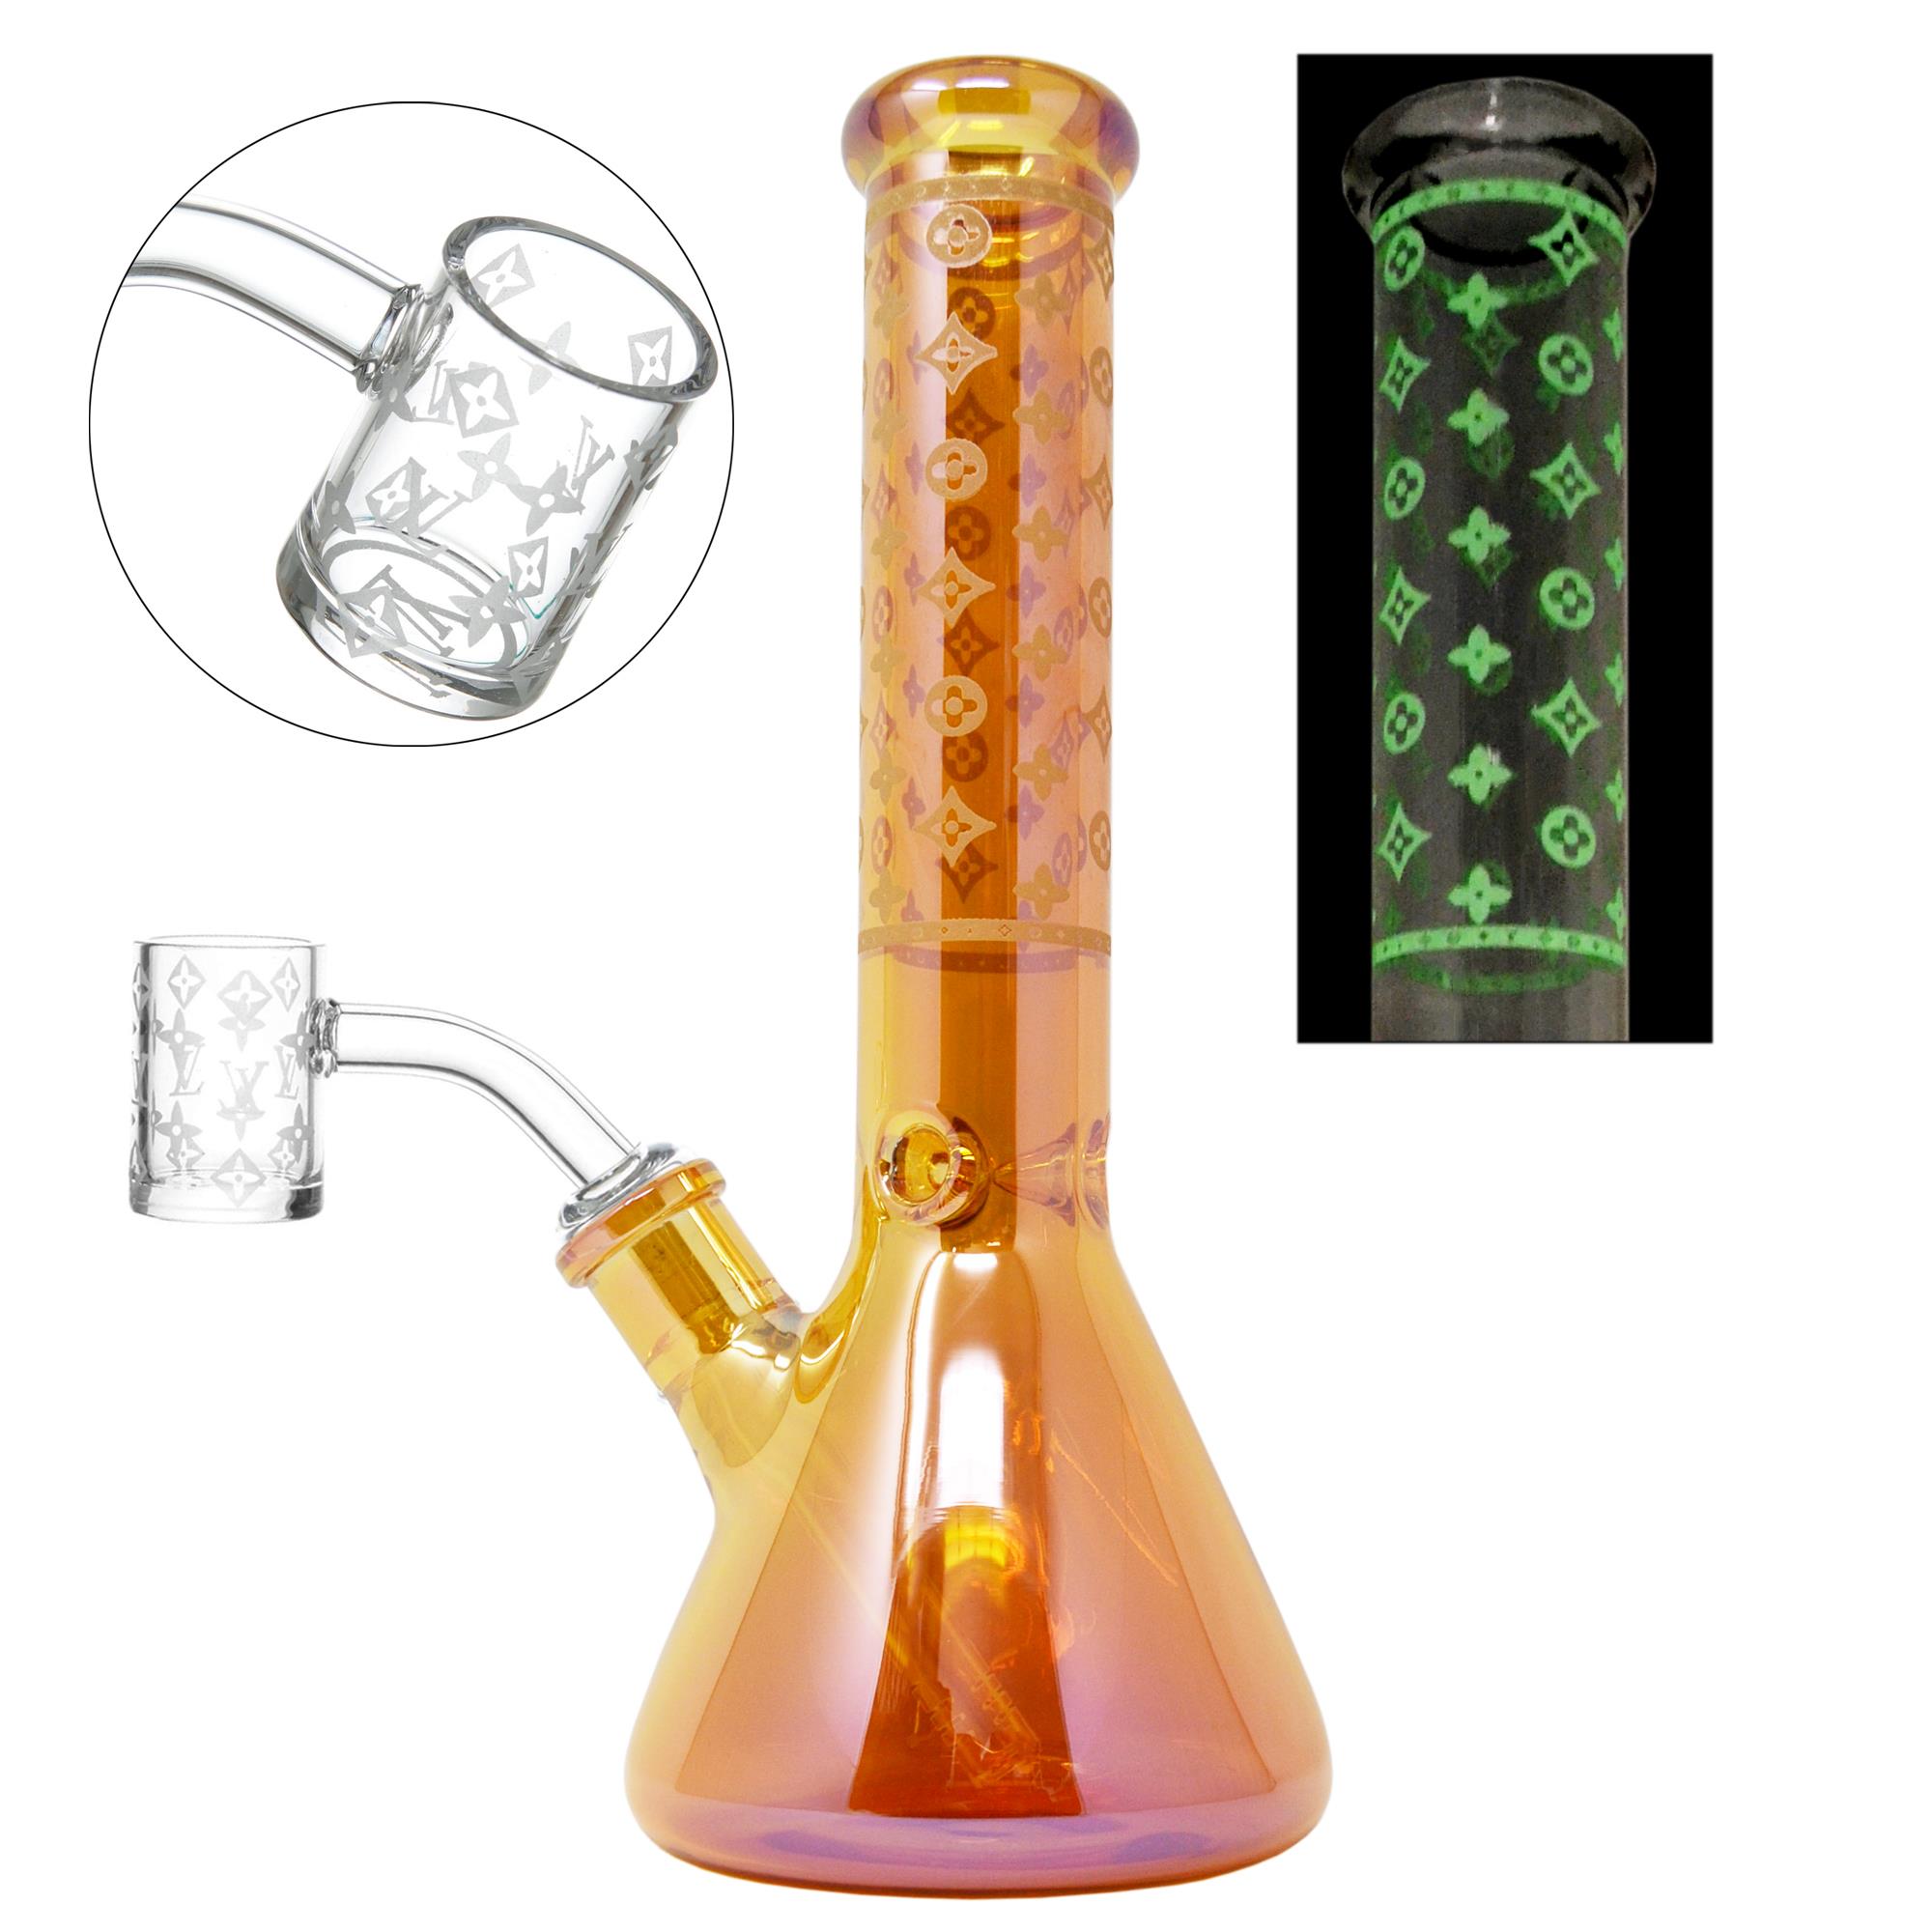 LOUIS ELECTROPLATED GLOW IN THE DARK ROSE GOLD DAB RIG